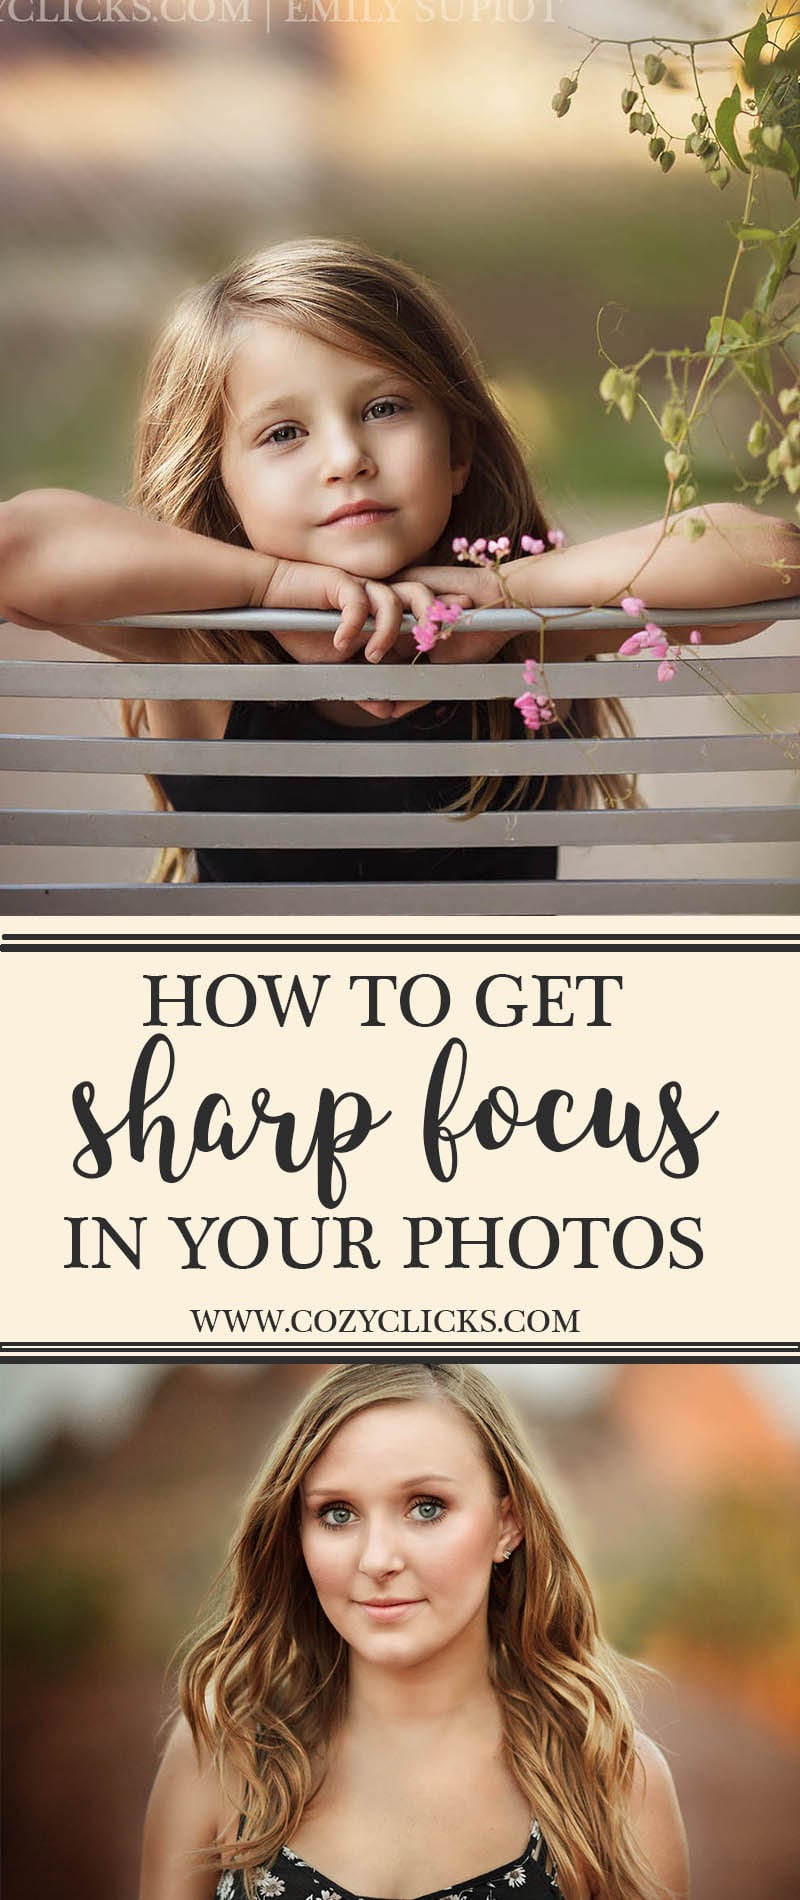 Get super sharp focus in you photos every time following these simple tips